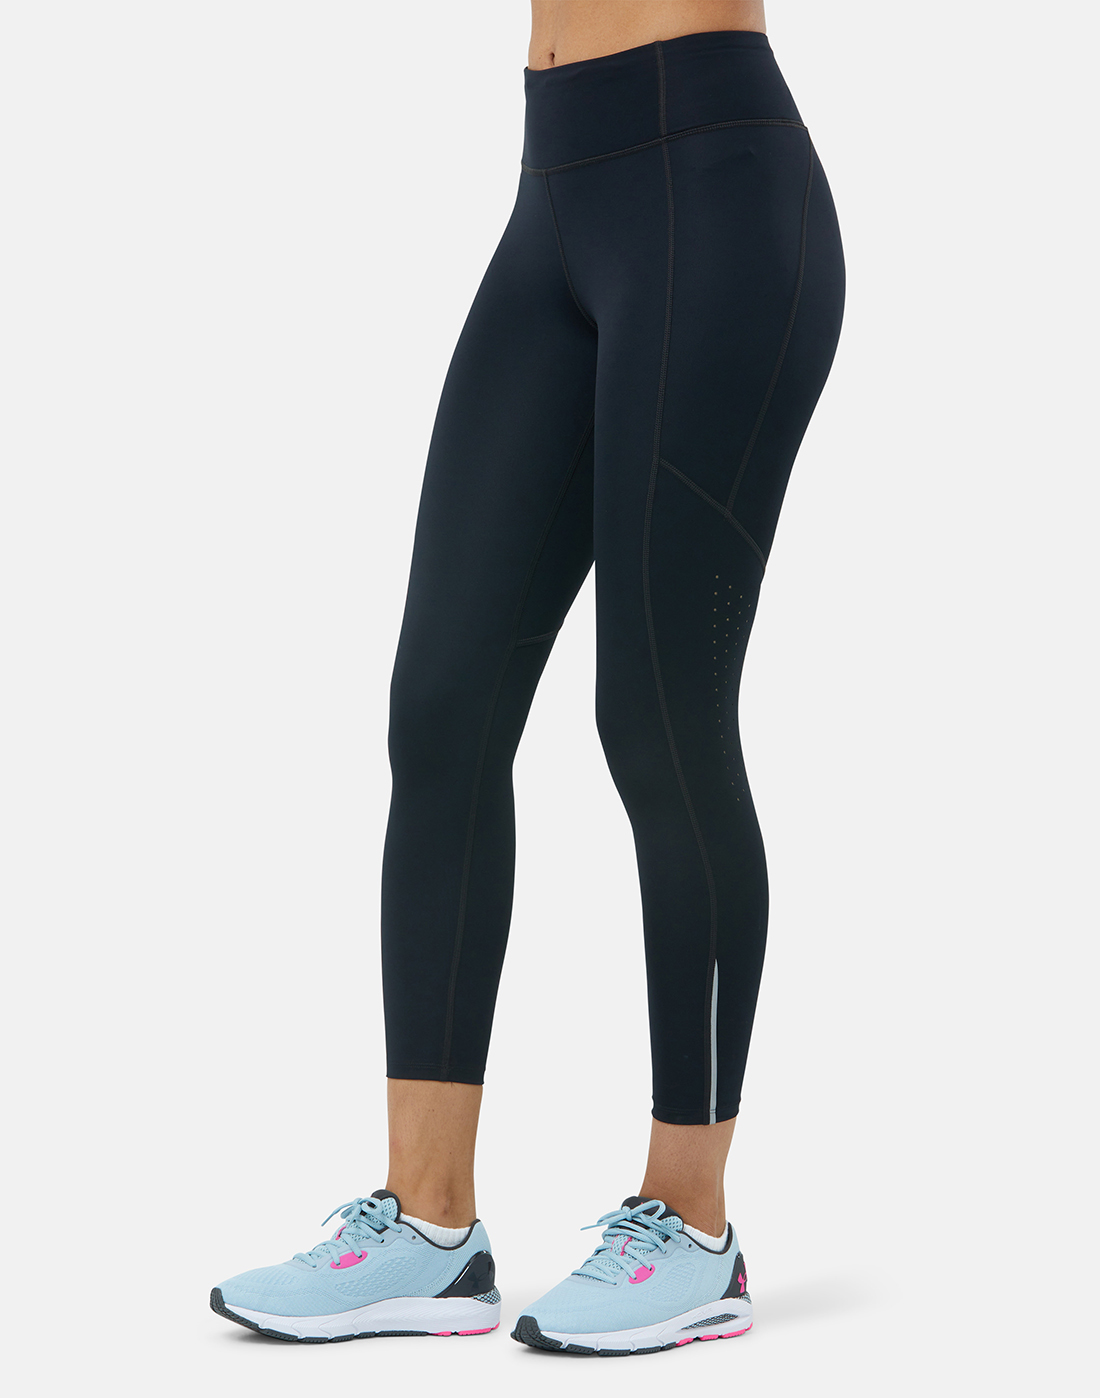 Under Armour Womens Fly Fast 3.0 Ankle Leggings - Black